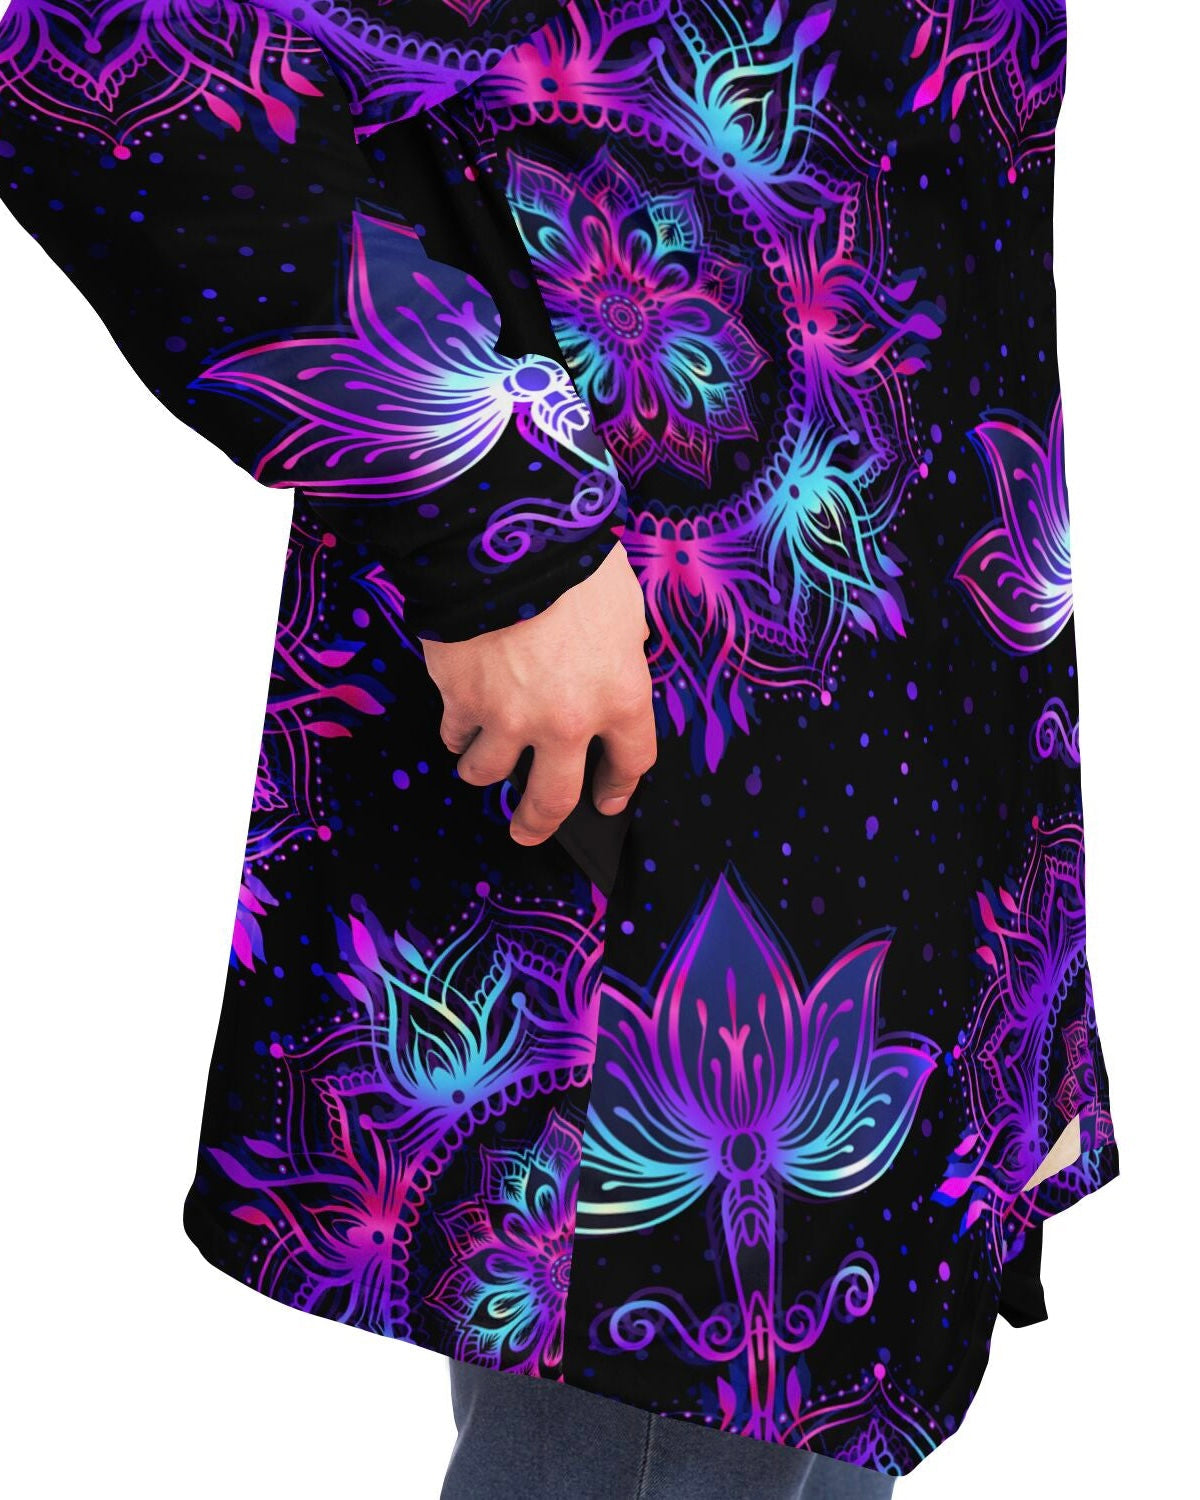 Side view of the model with a hand in the cloak pocket, highlighting the Starlight Mandala design.